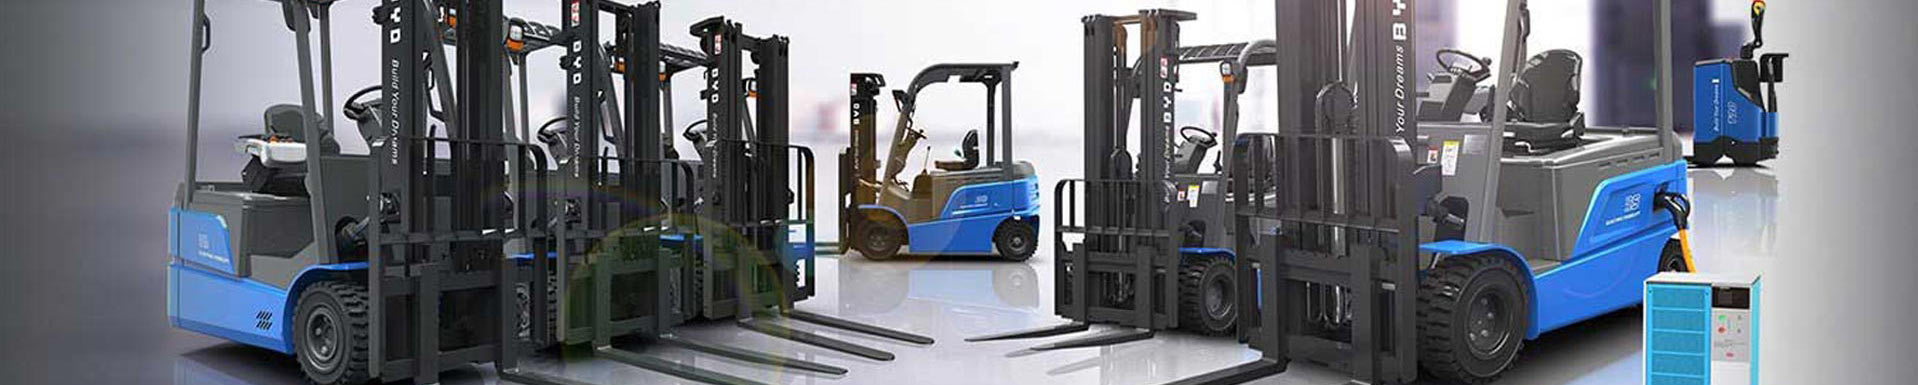 Forklifts For Rent Short And Long Term Cromer Material Handling